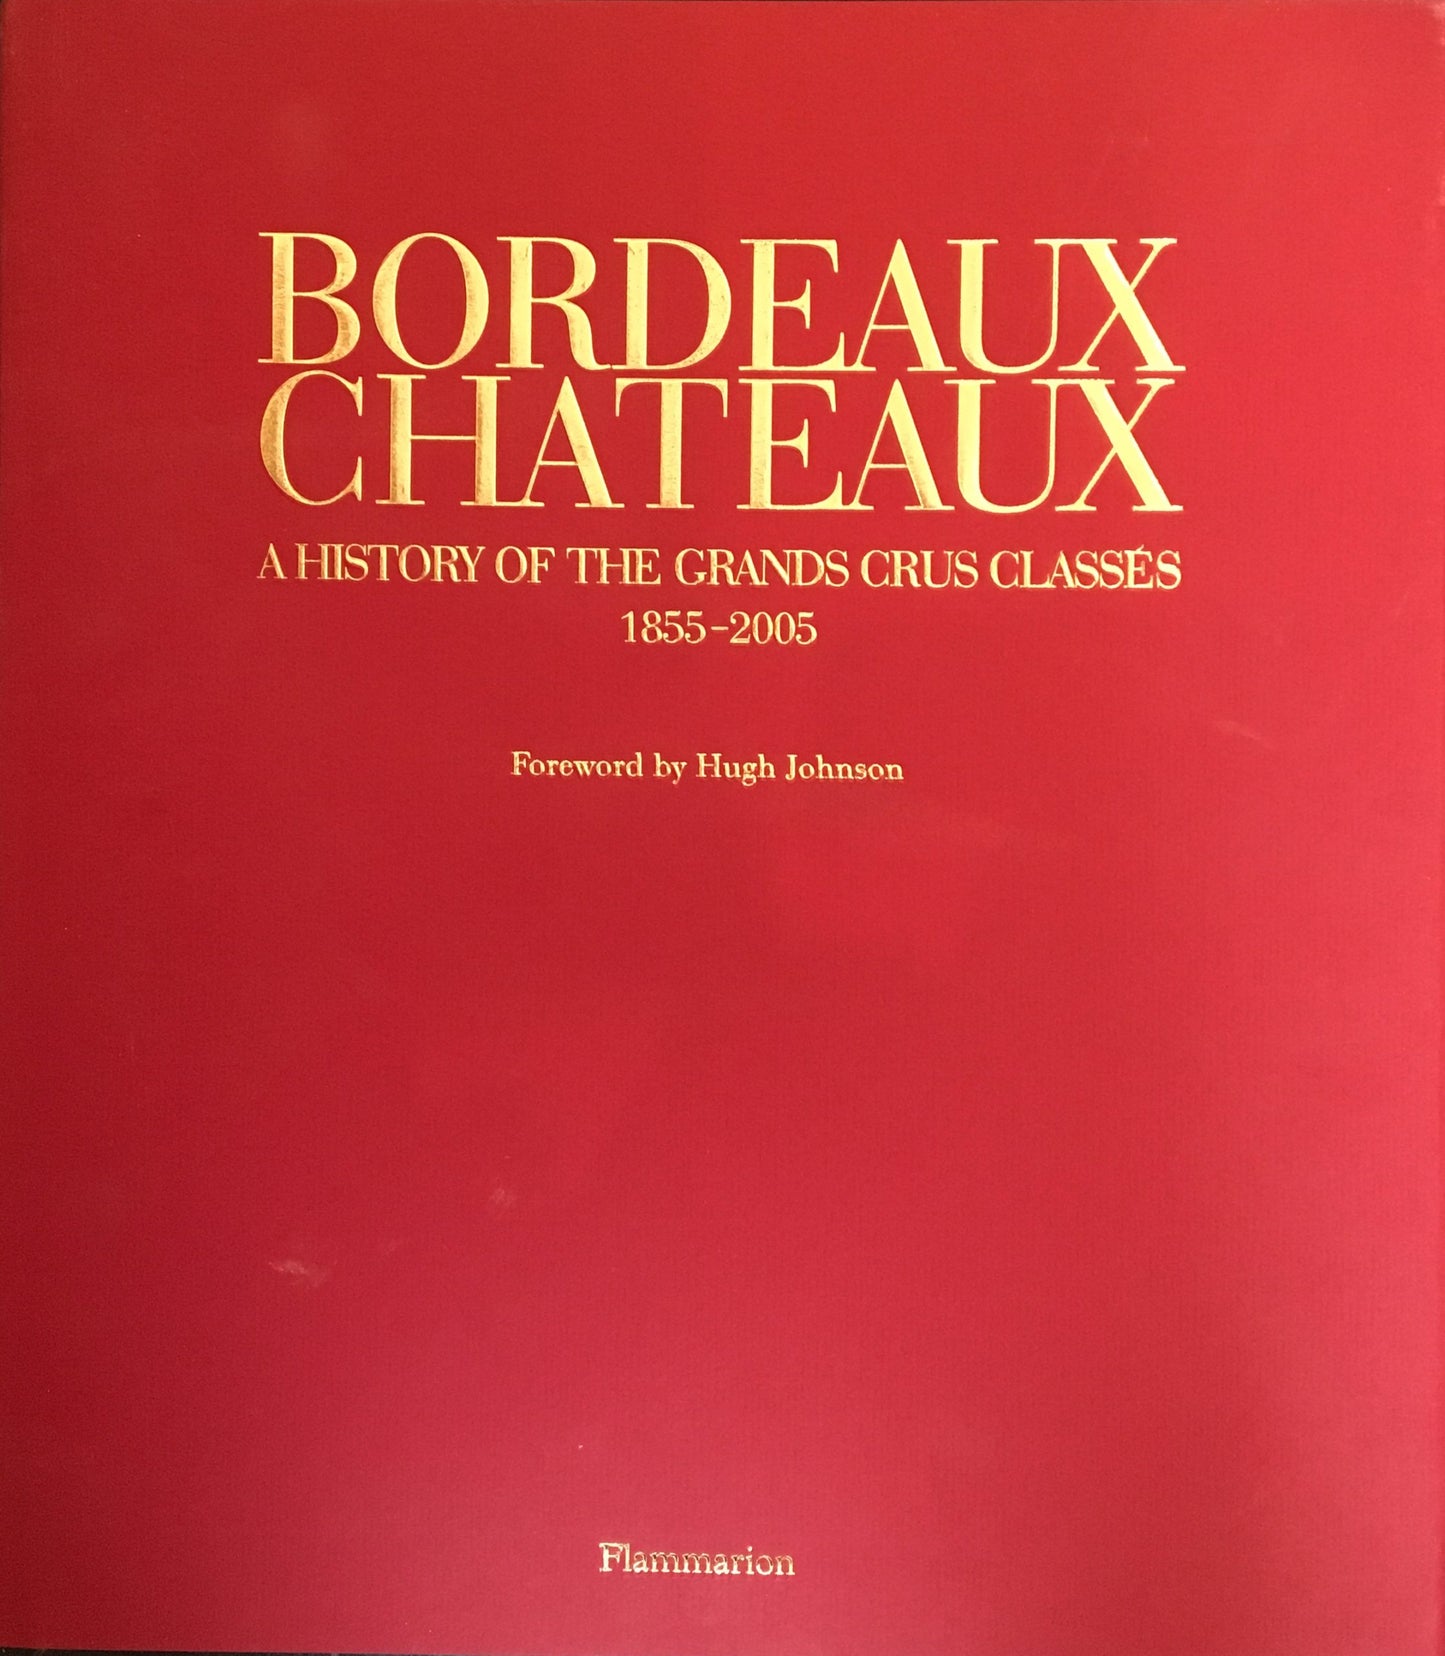 Bordeaux Chateaux / A History of the Grands Crus Classes Since 1855